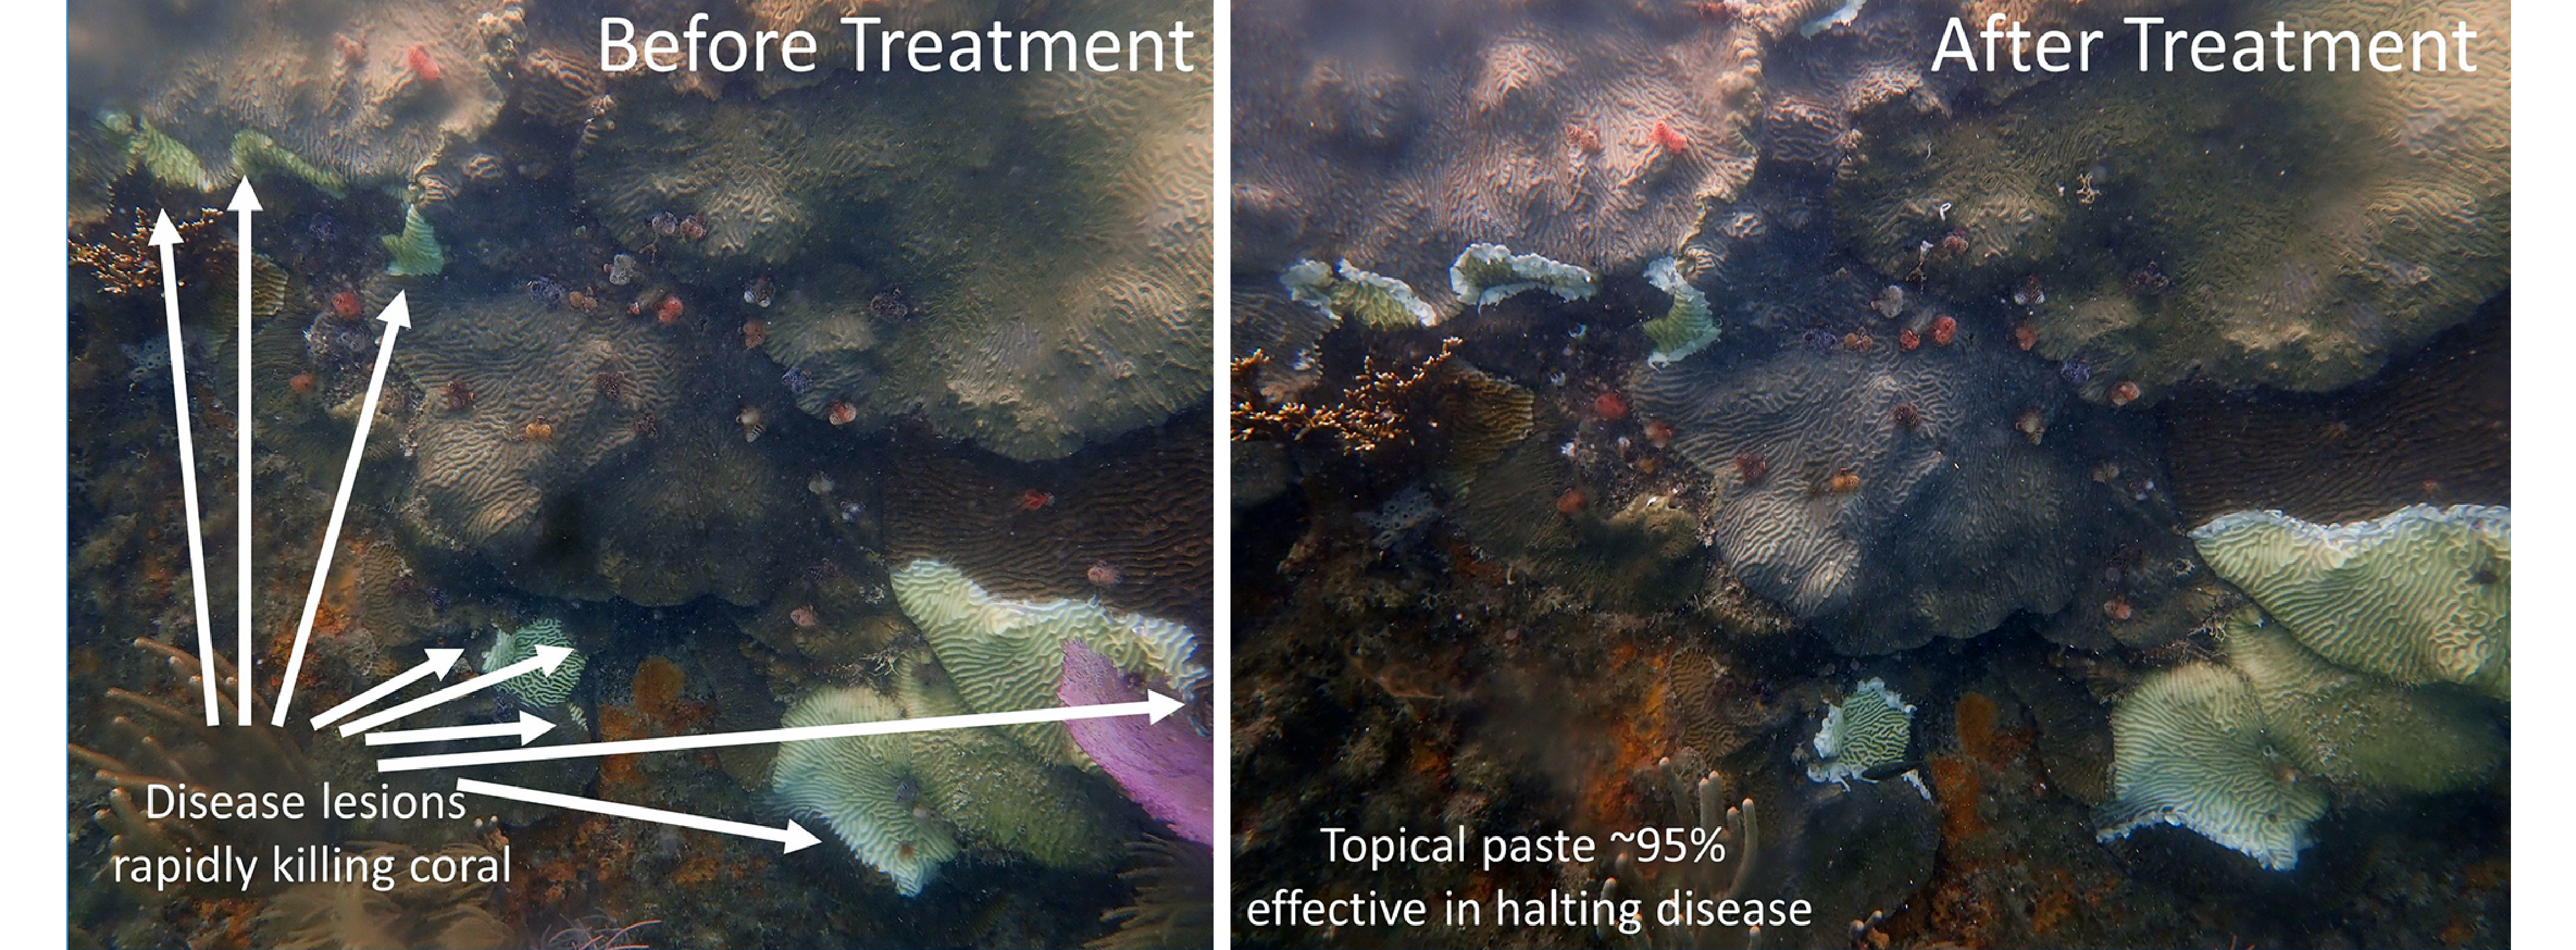 Side-by-side photos showing a close up of numerous corals covering a substrate. On the left, white arrows point to areas of recent mortality that are a lighter color than the adjacent live tissue. On the right, the corals have been treated, as shown by white paste around the lighter color spots.